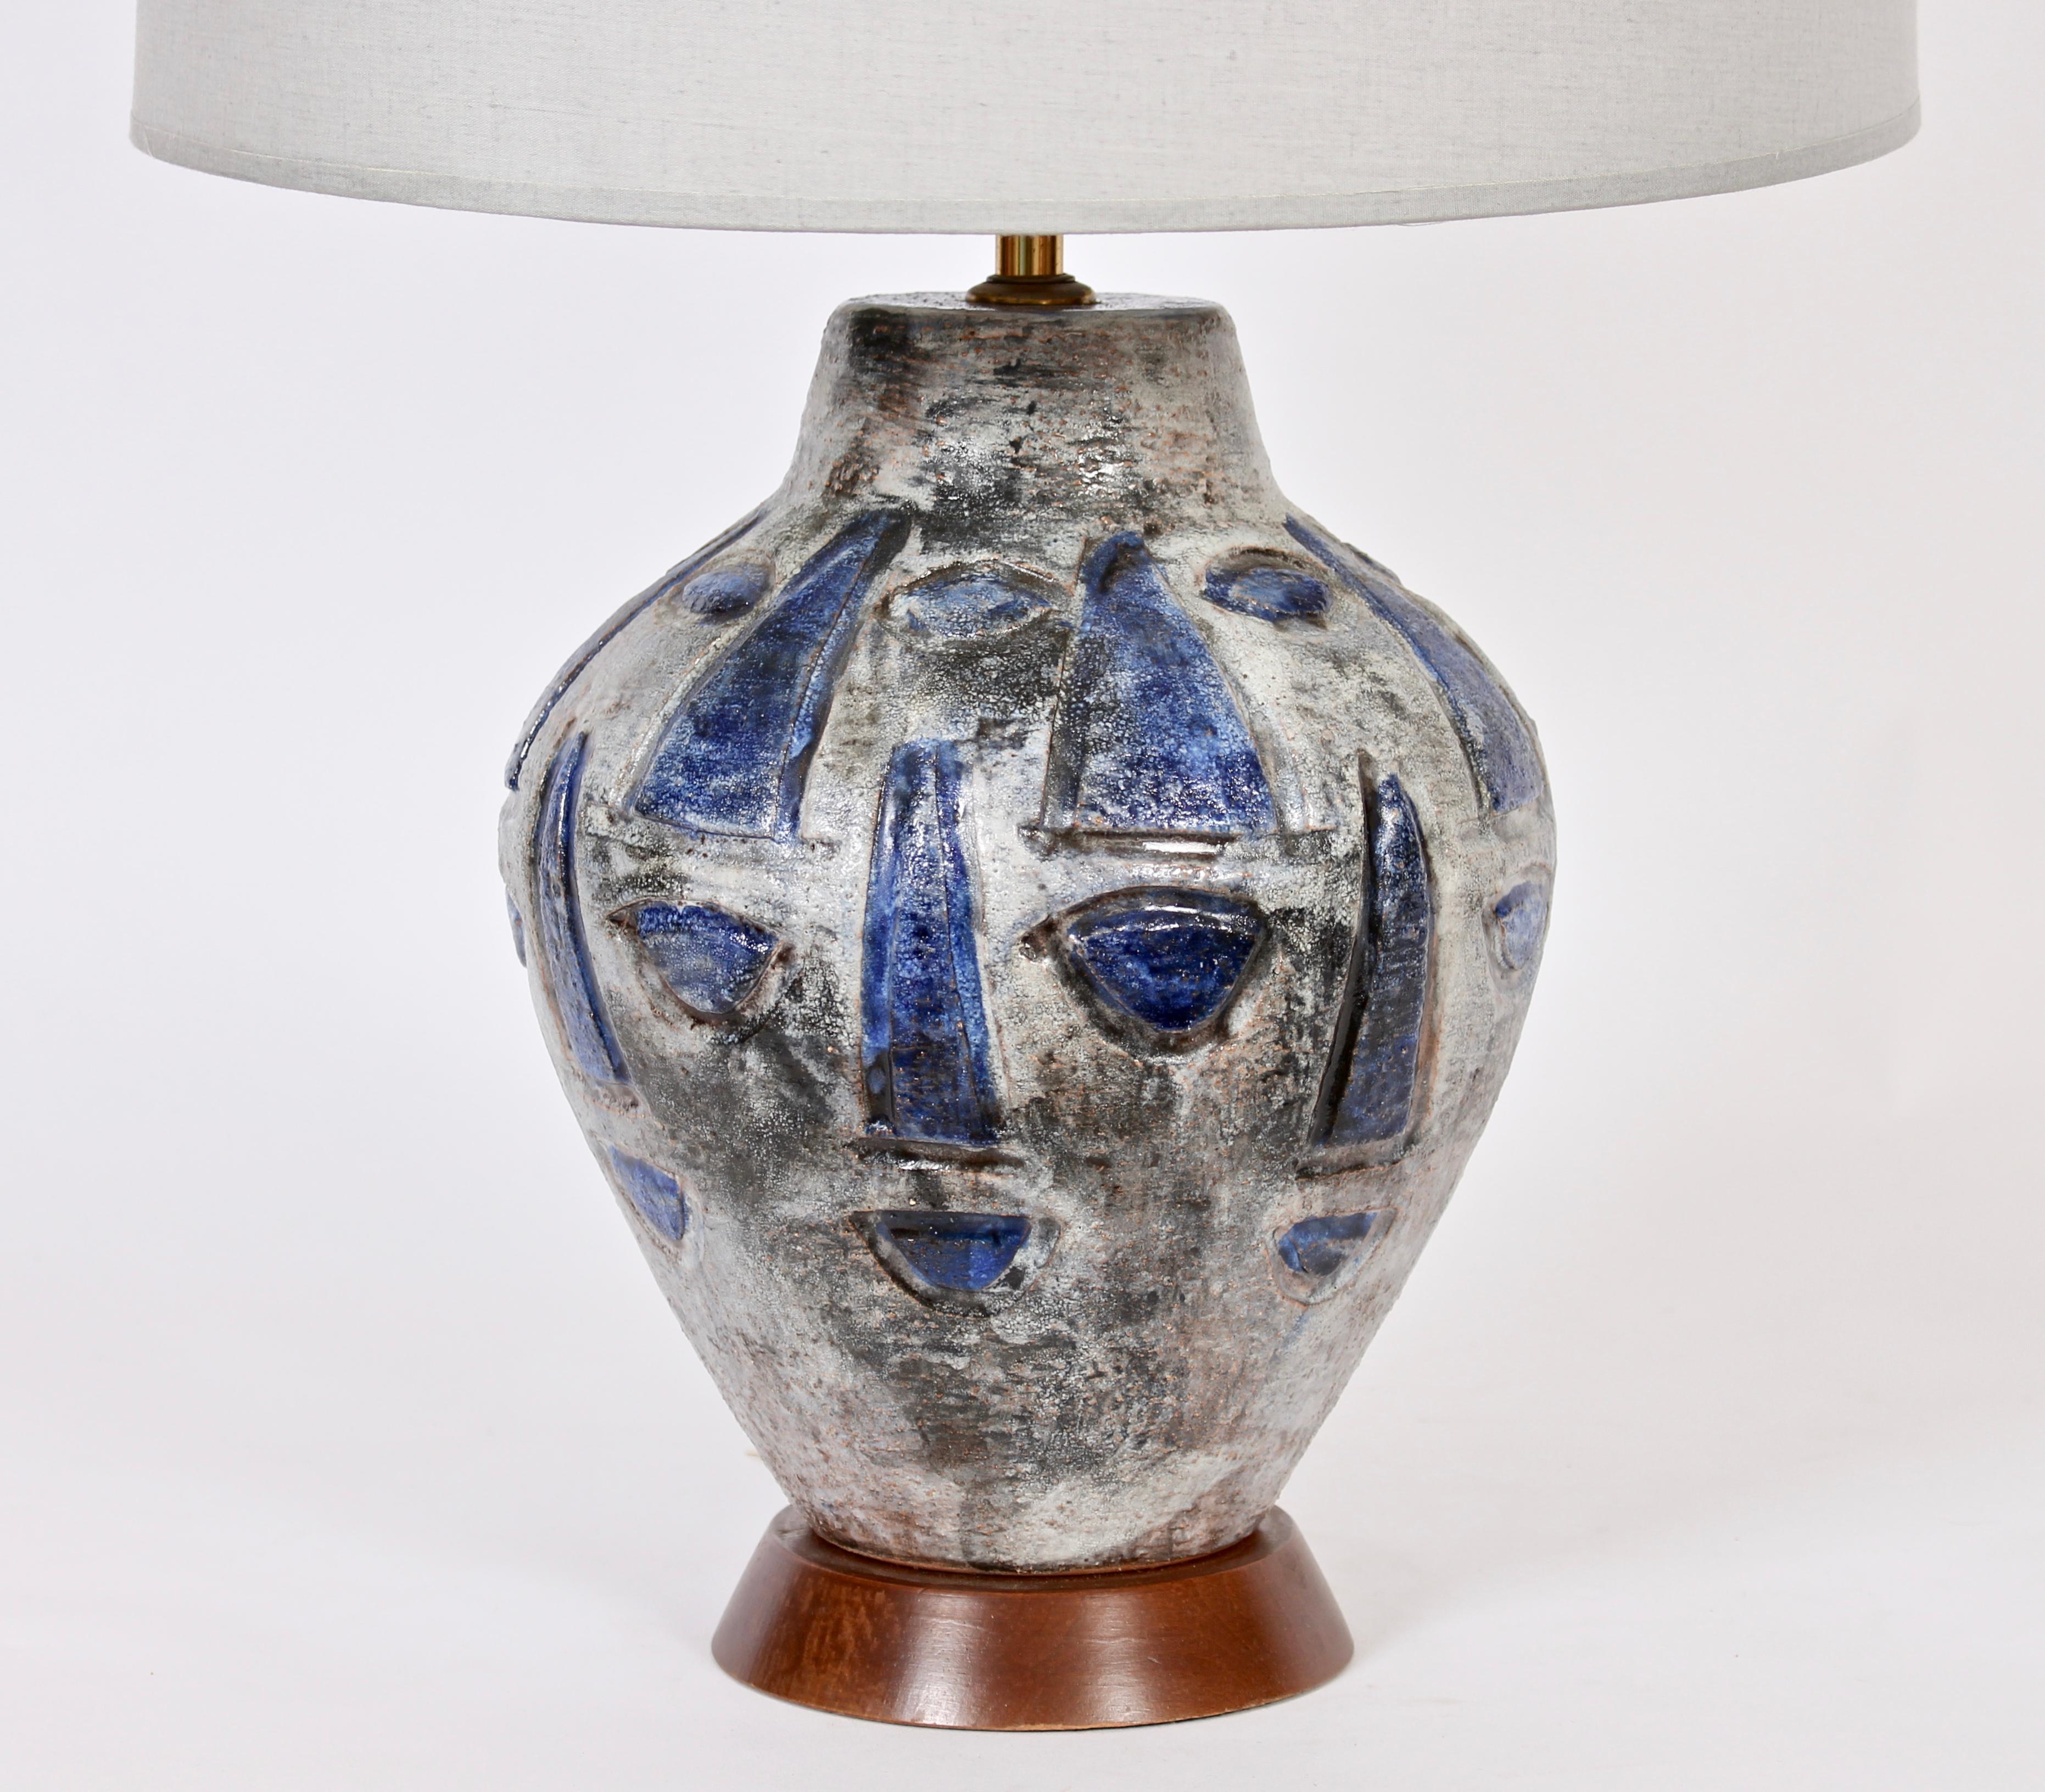 Lively Scandinavian Modern Incised Glazed Ceramic Table Lamp. Featuring a sculptural neutral Gray painted jug form with hand crafted highlighted abstract design lined in Black with Bright Blue oval and triangular shapes. On Walnut base. 17H to top